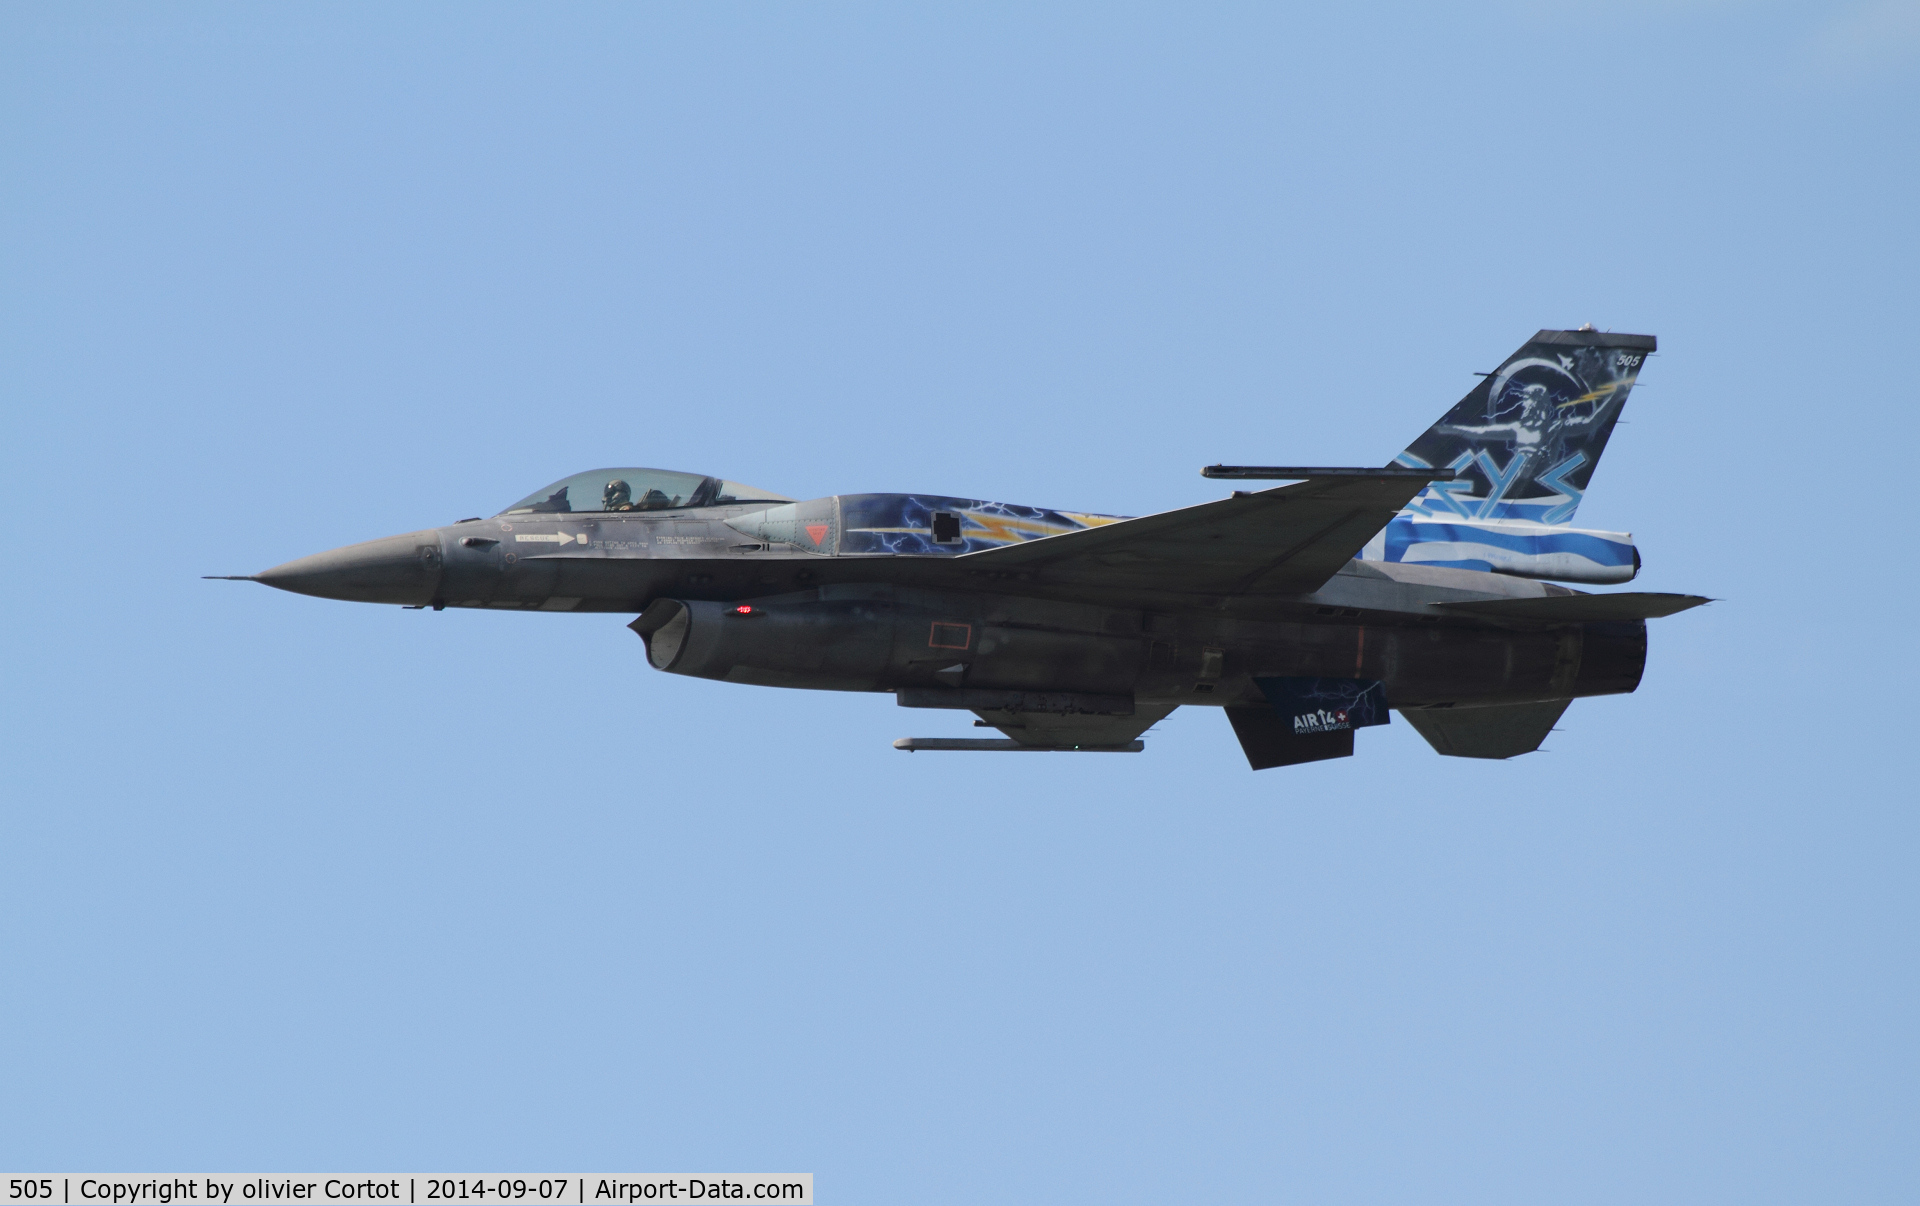 505, General Dynamics F-16C Fighting Falcon C/N XK-6, F-16 with CFT is not the best choice to display the F-16...